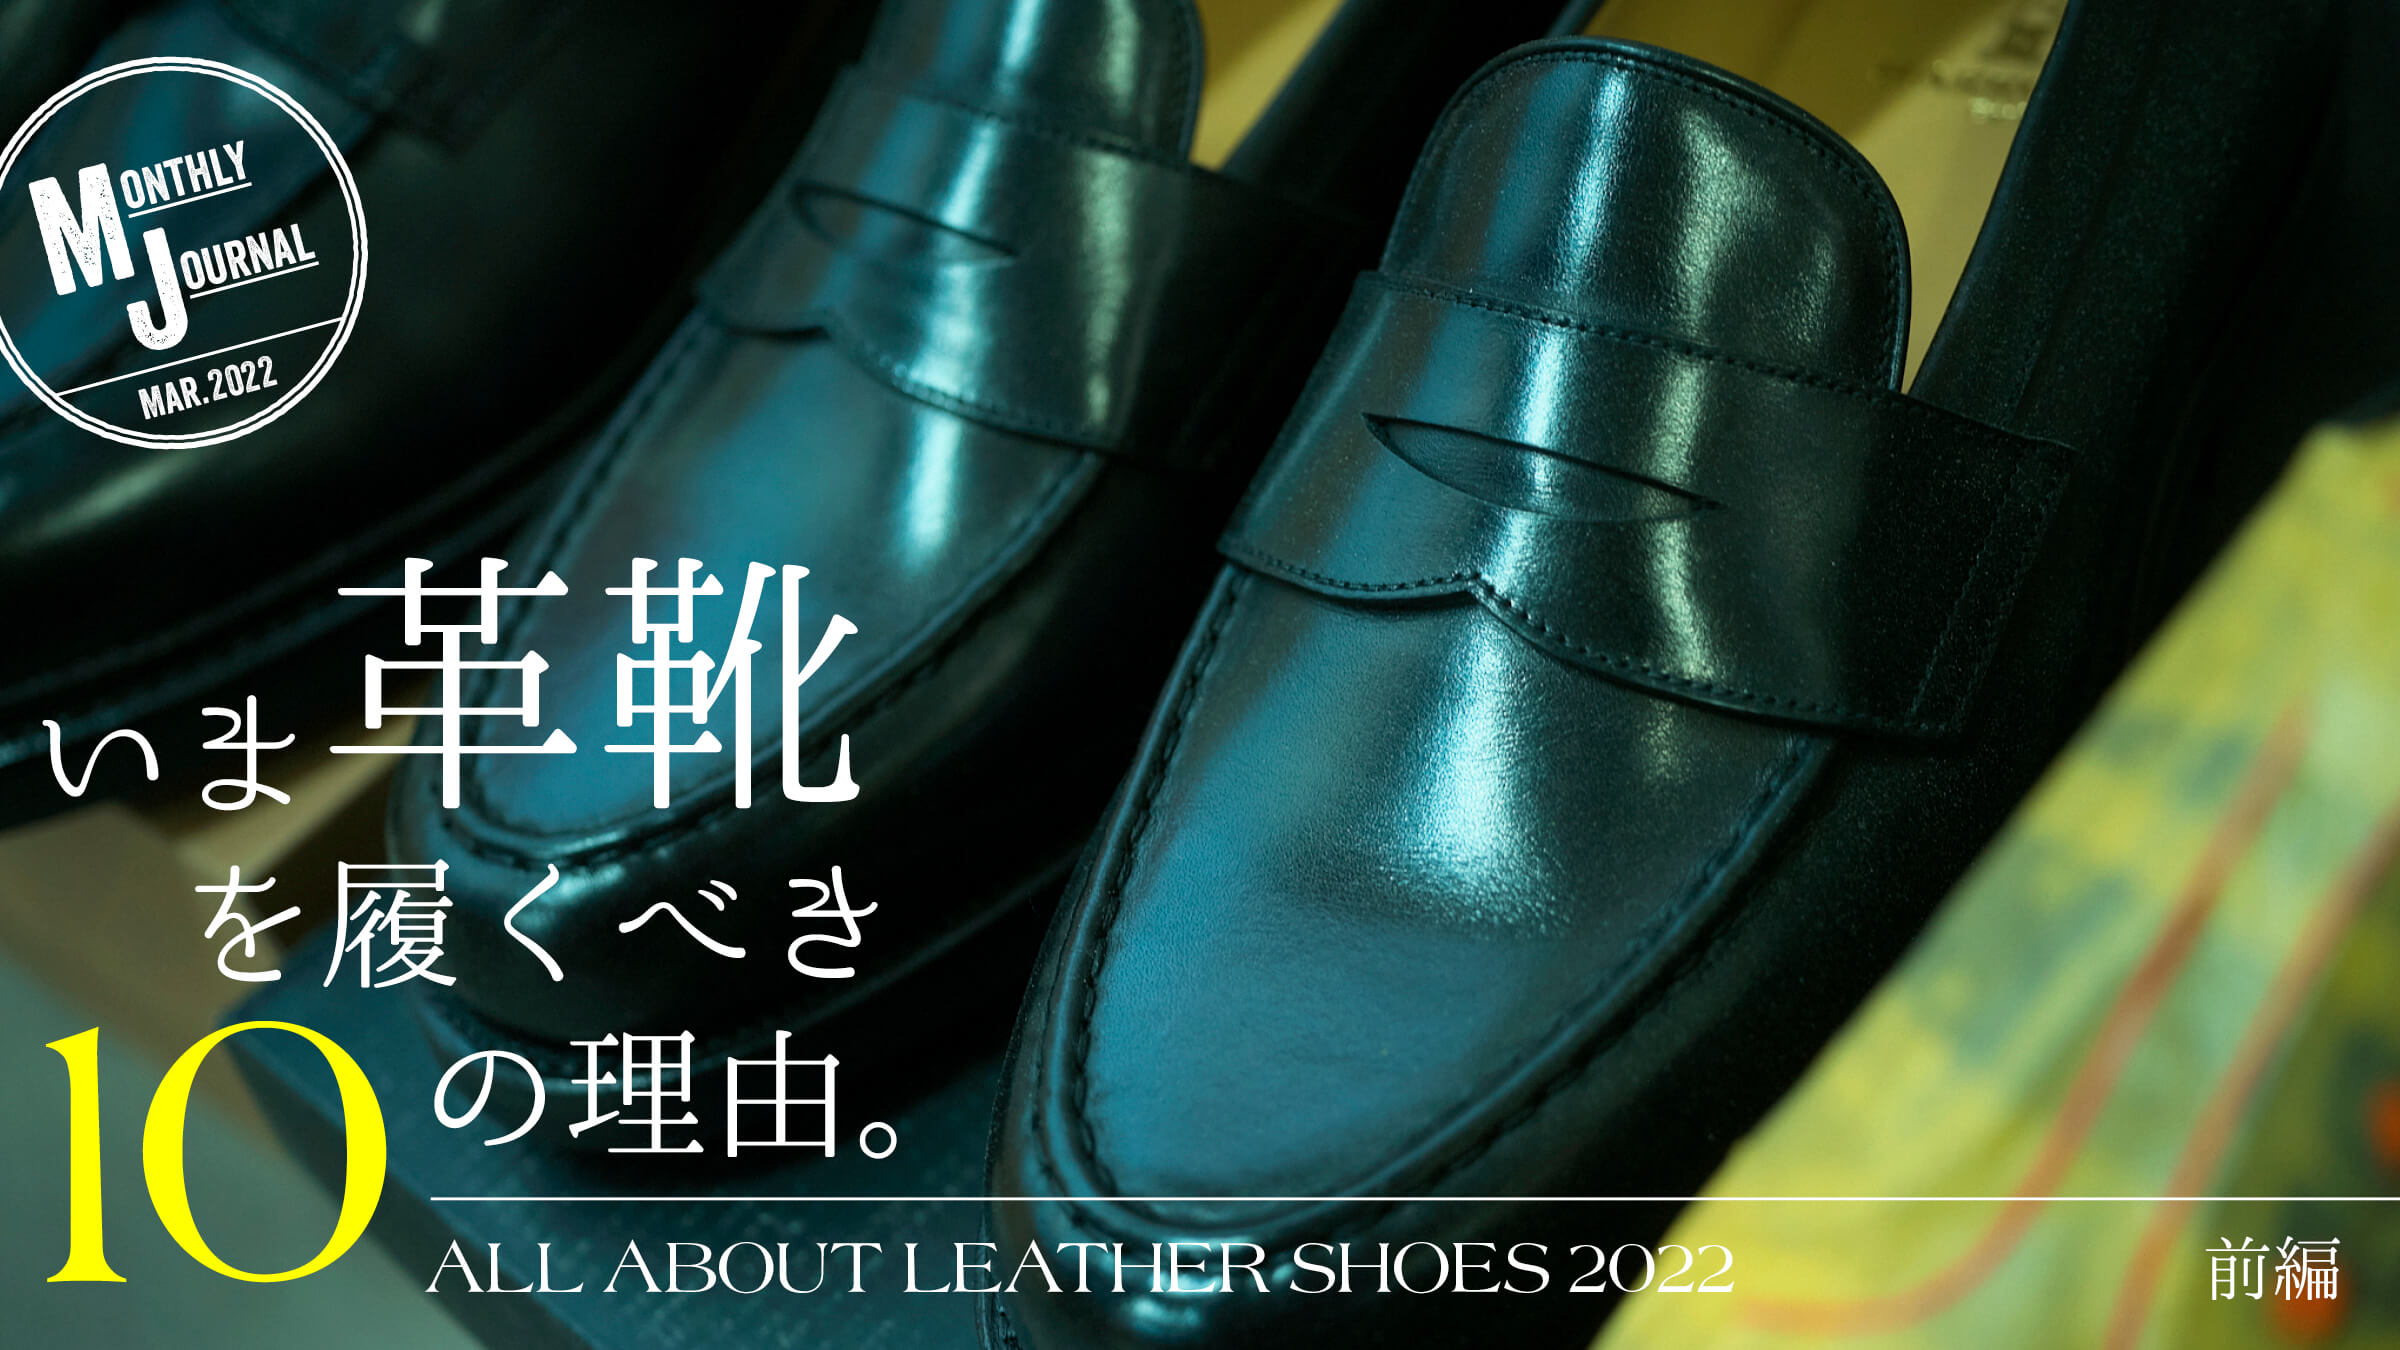 ALL ABOUT LEATHER SHOES 2022いま革靴を履くべき10の理由。前編